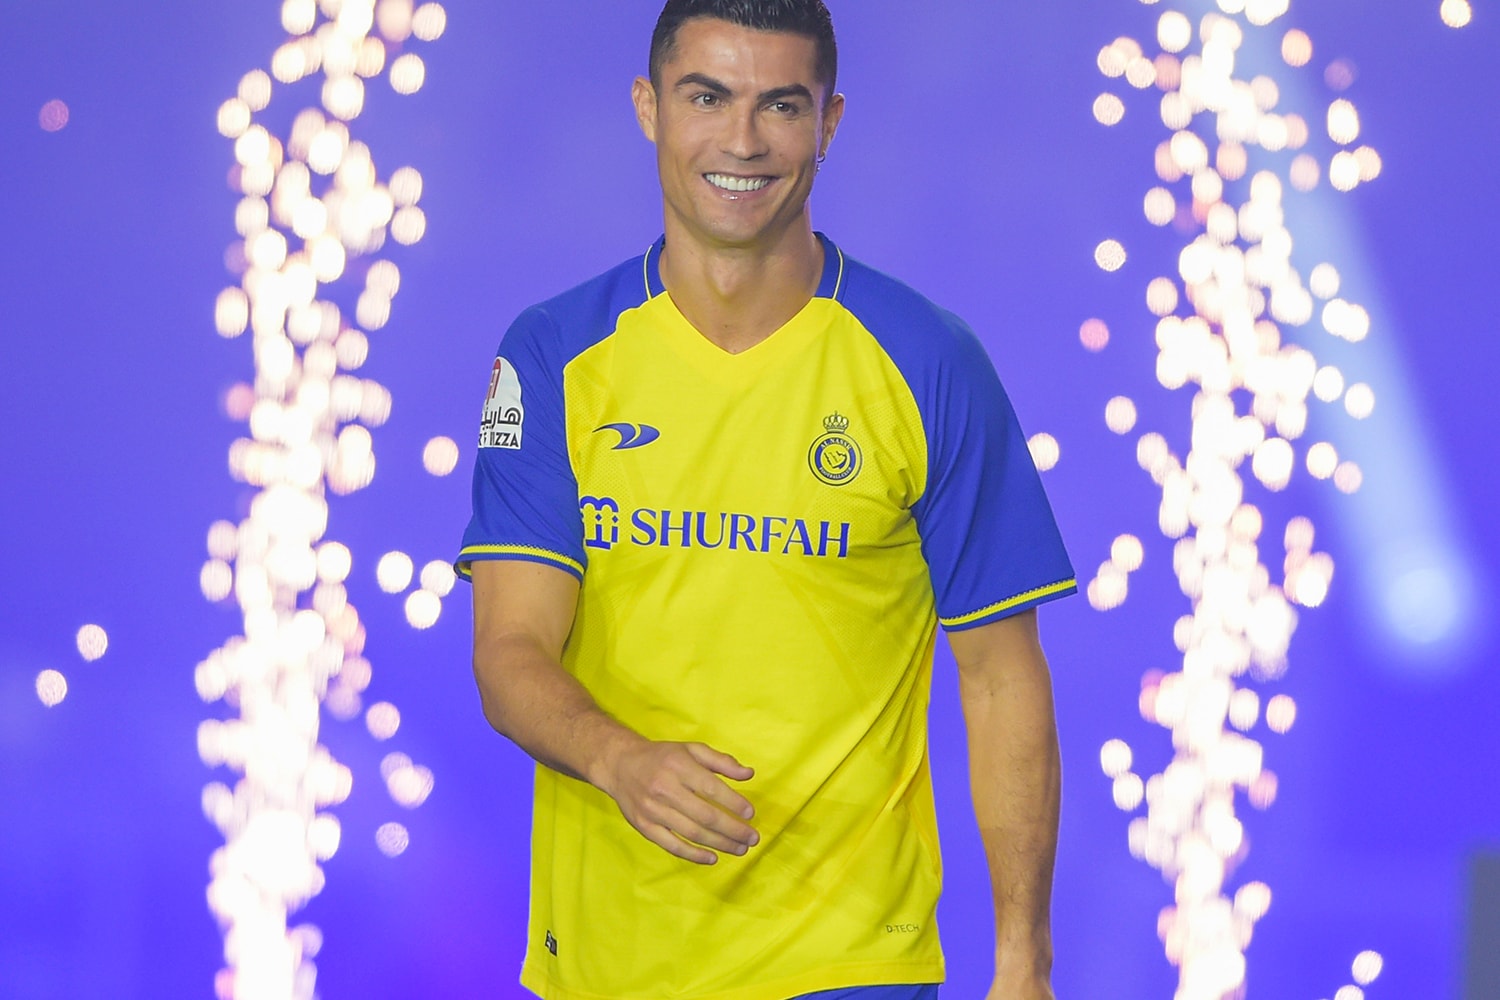 https://image-cdn.hypb.st/https%3A%2F%2Fhypebeast.com%2Fimage%2F2023%2F01%2Fcristiano-ronaldo-al-nassr-fc-unable-to-play-foreign-players-quota-info-0-1.jpg?cbr=1&q=90